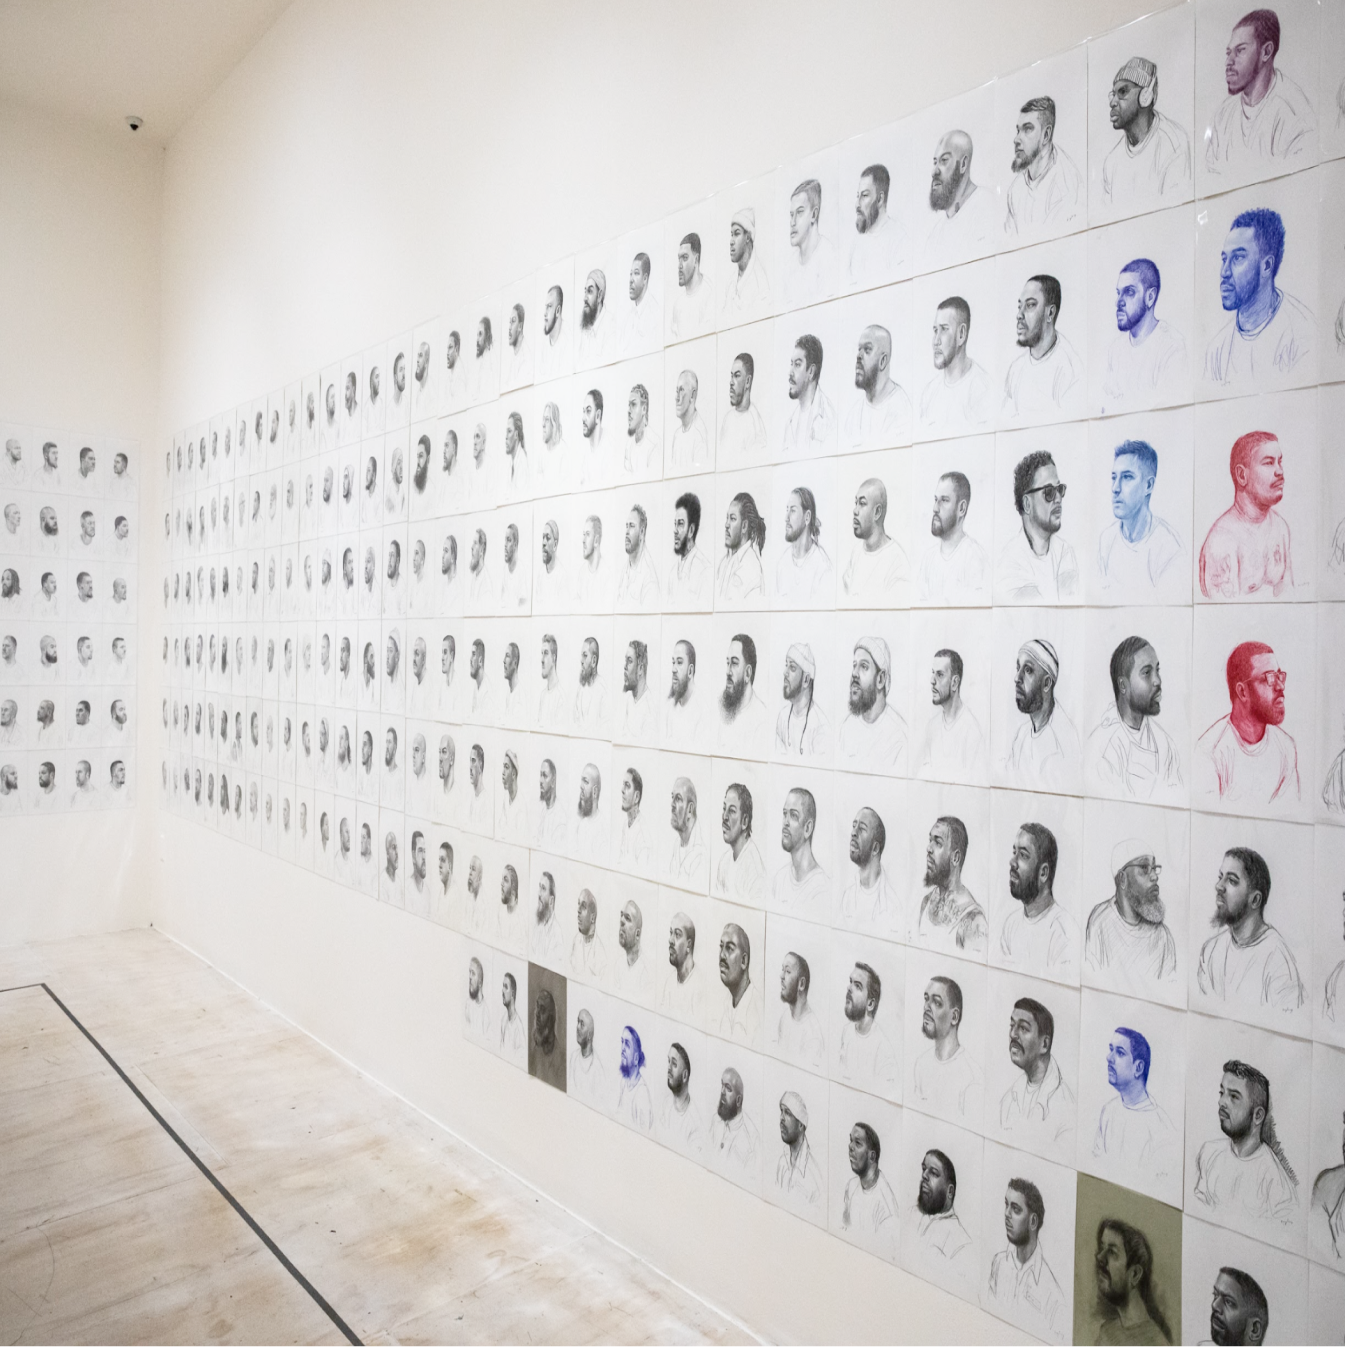 A white wall extends from right to left, turning a corner, covered with seven and then six rows of individual portraits. From neck above, facial features are shaded in detail largely in black and grays (with a few in red or blue). Over 200 individual portraits of are in view.